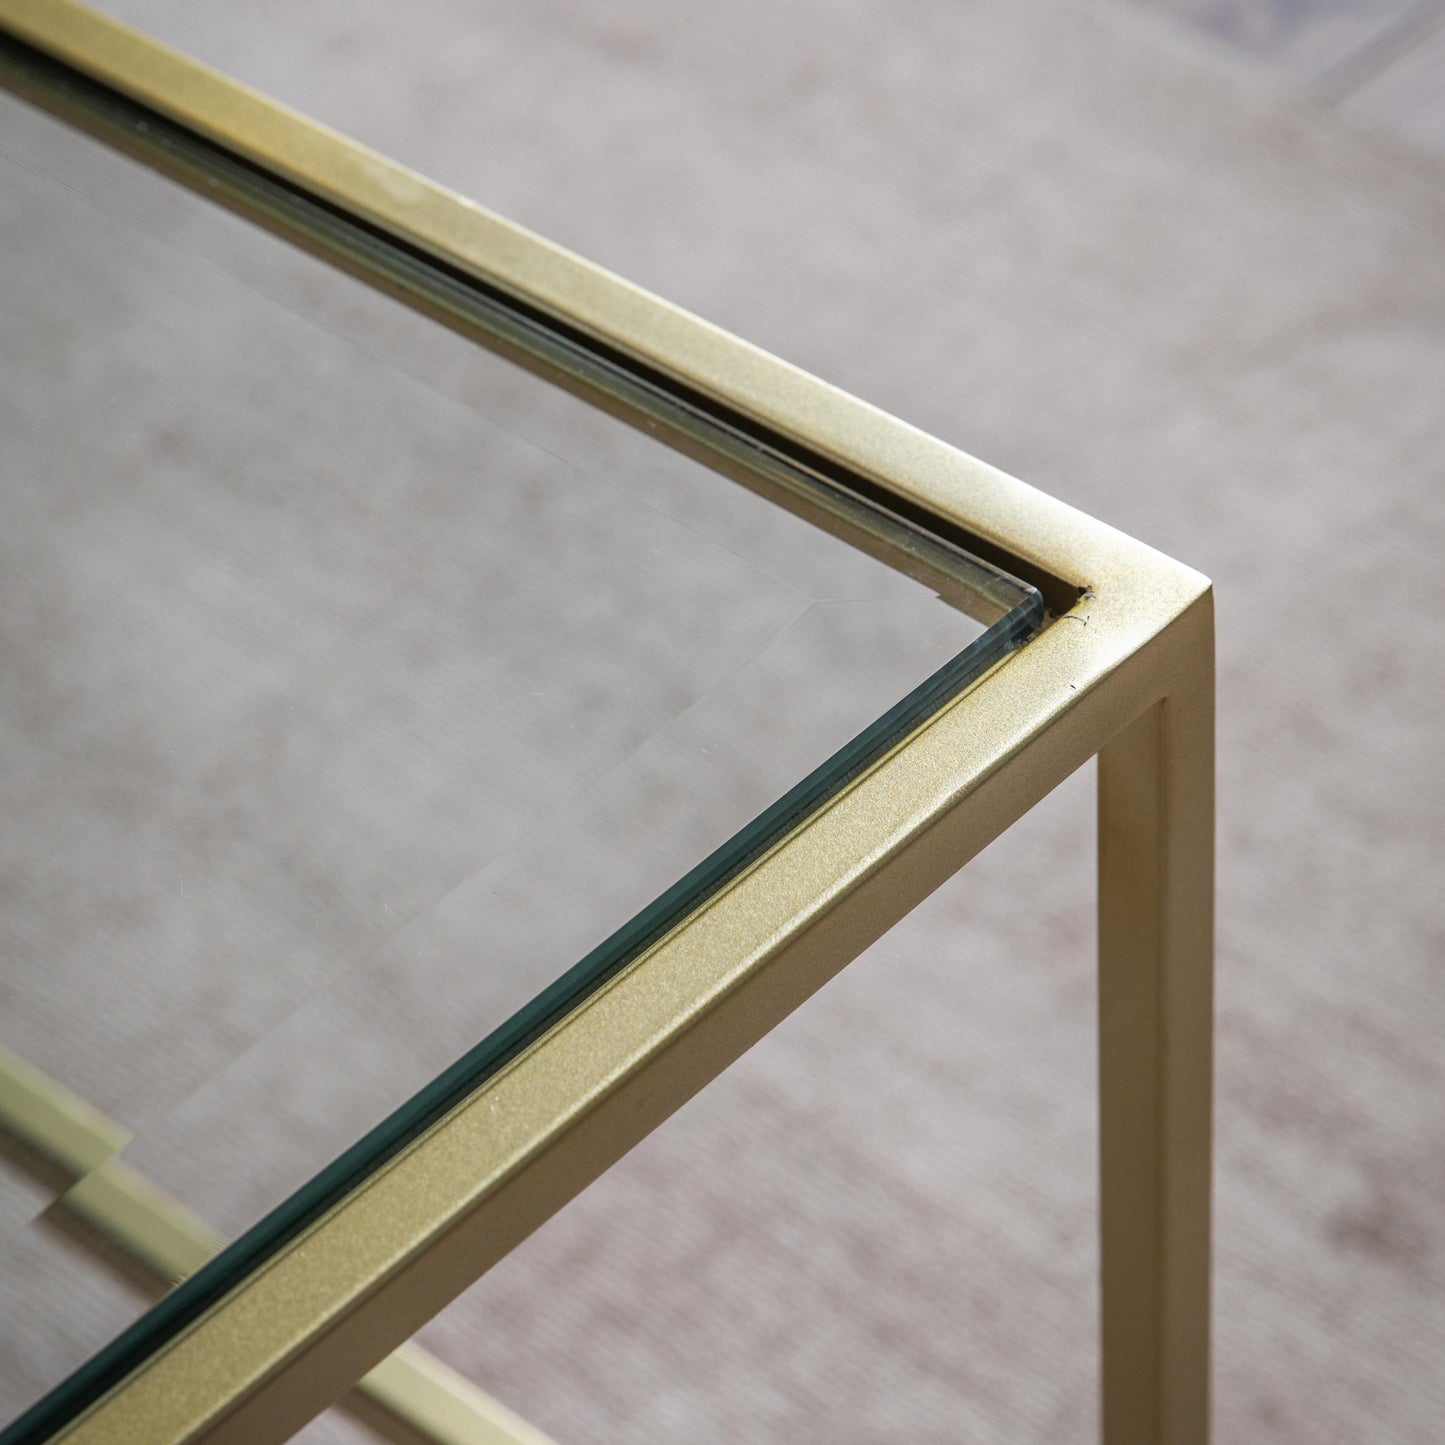 A close up of the champagne-colored Engleborne Coffee Table with a brass frame, perfect for home furniture and interior decor.